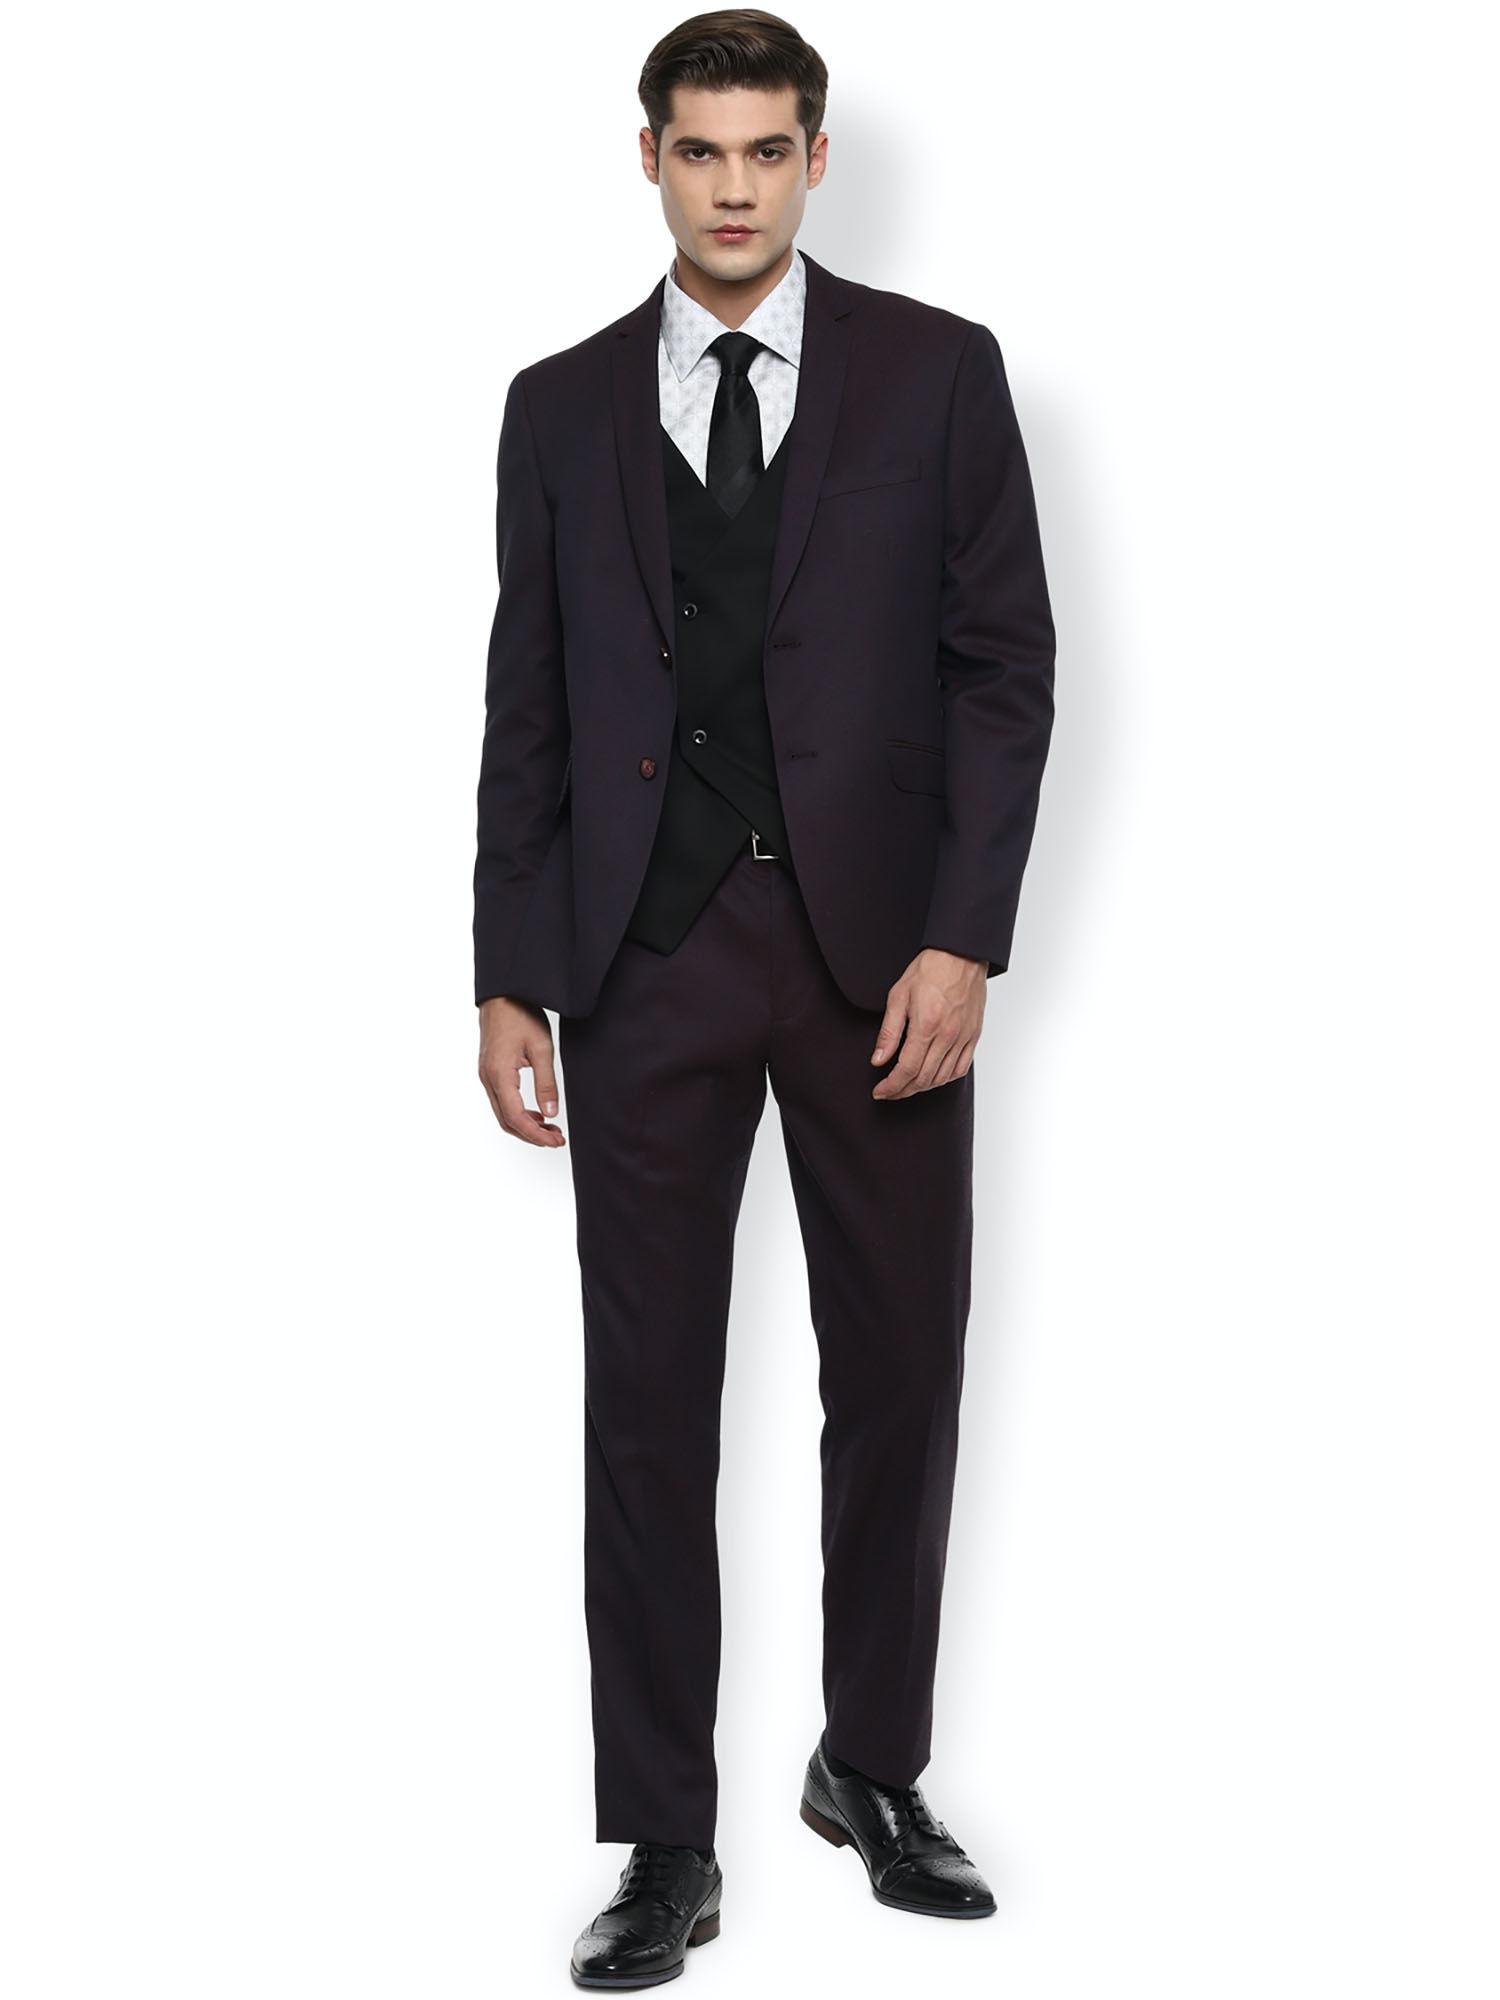 maroon-two-piece-suit-(set-of-2)